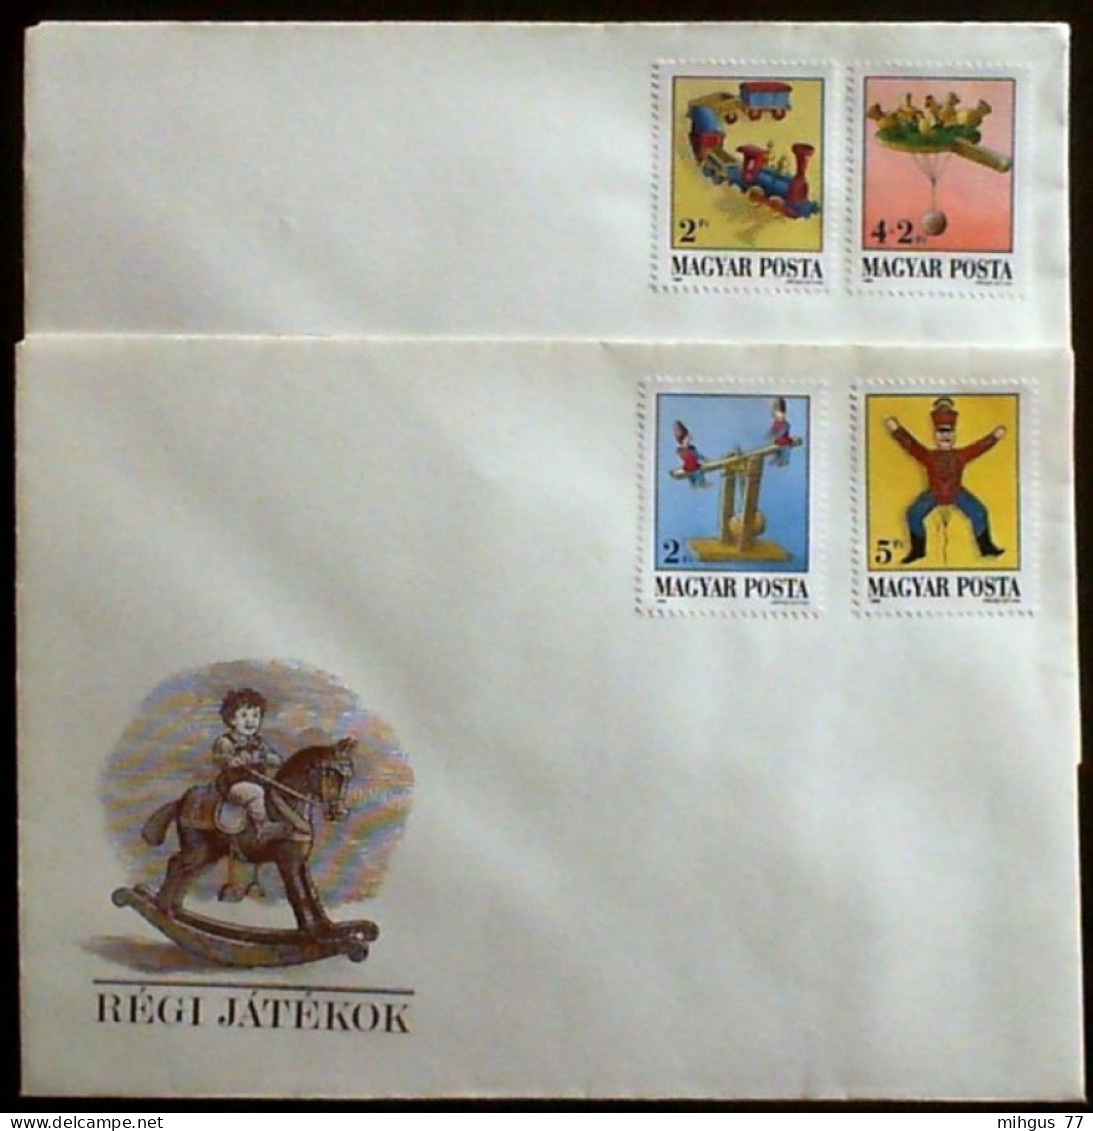 Hungary 1988 FDC Old-fashioned Children's Belongings - Covers & Documents